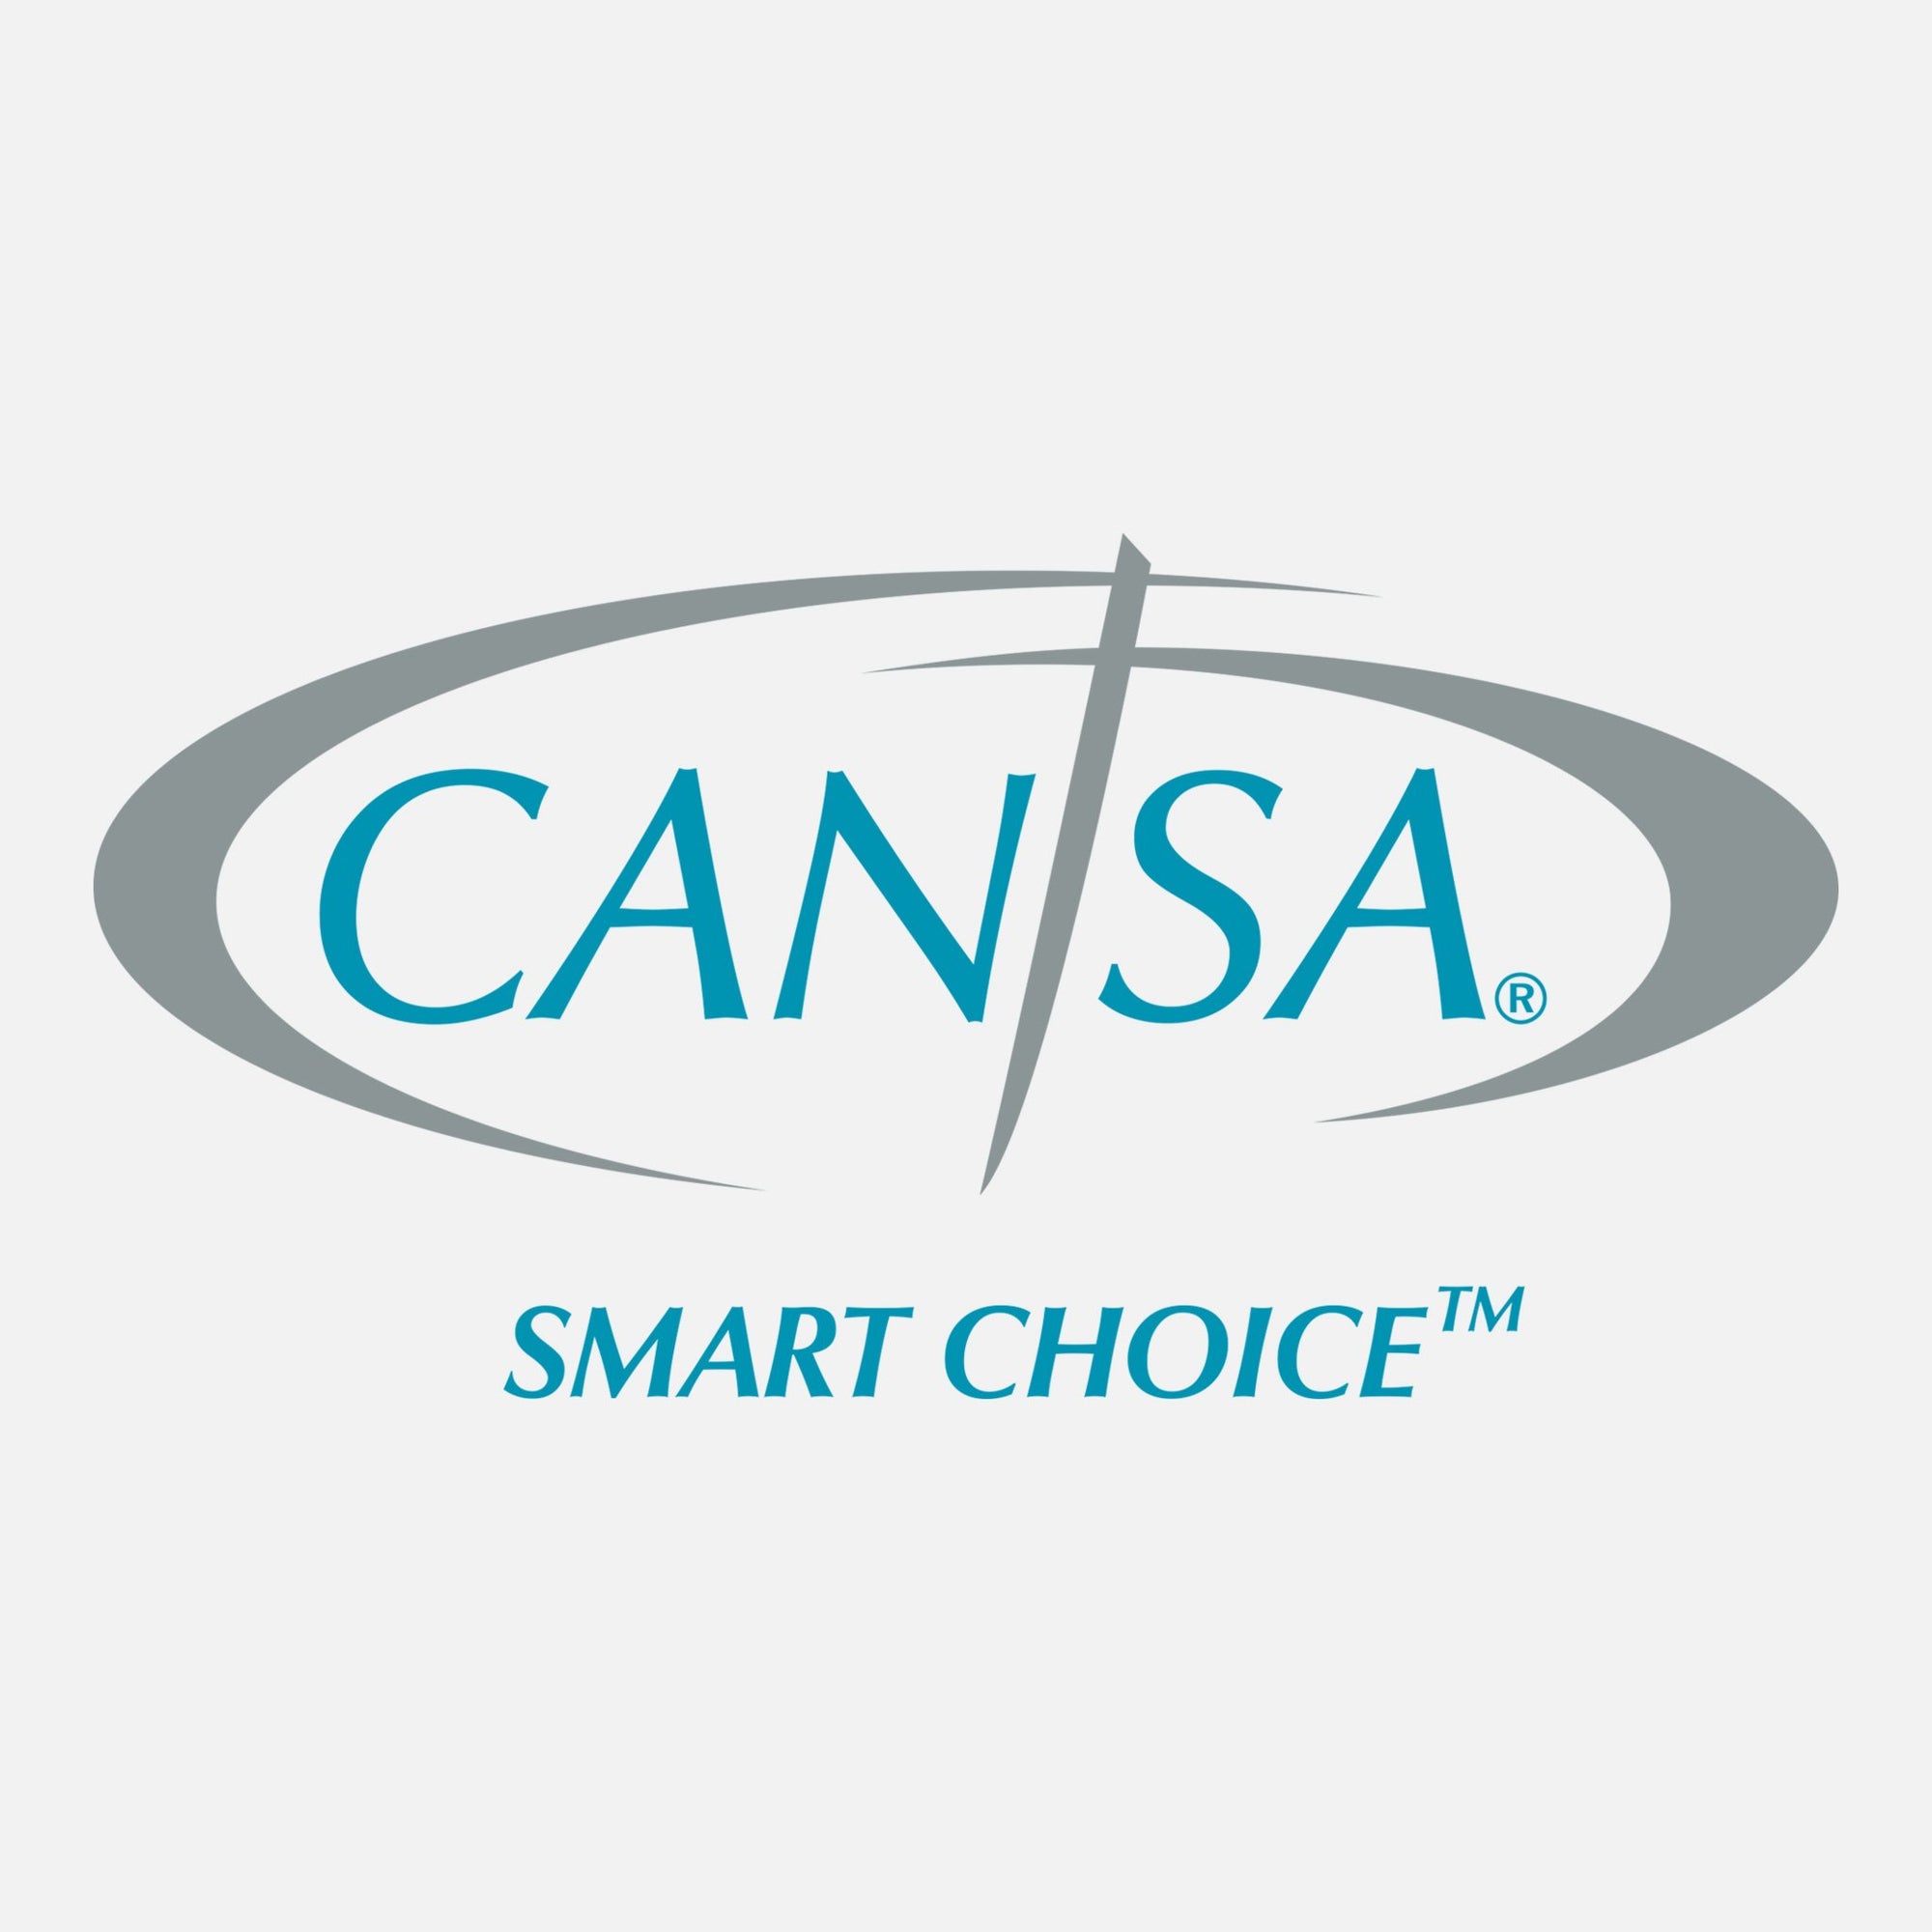 red espresso® is a CANSA Smart Choice Product